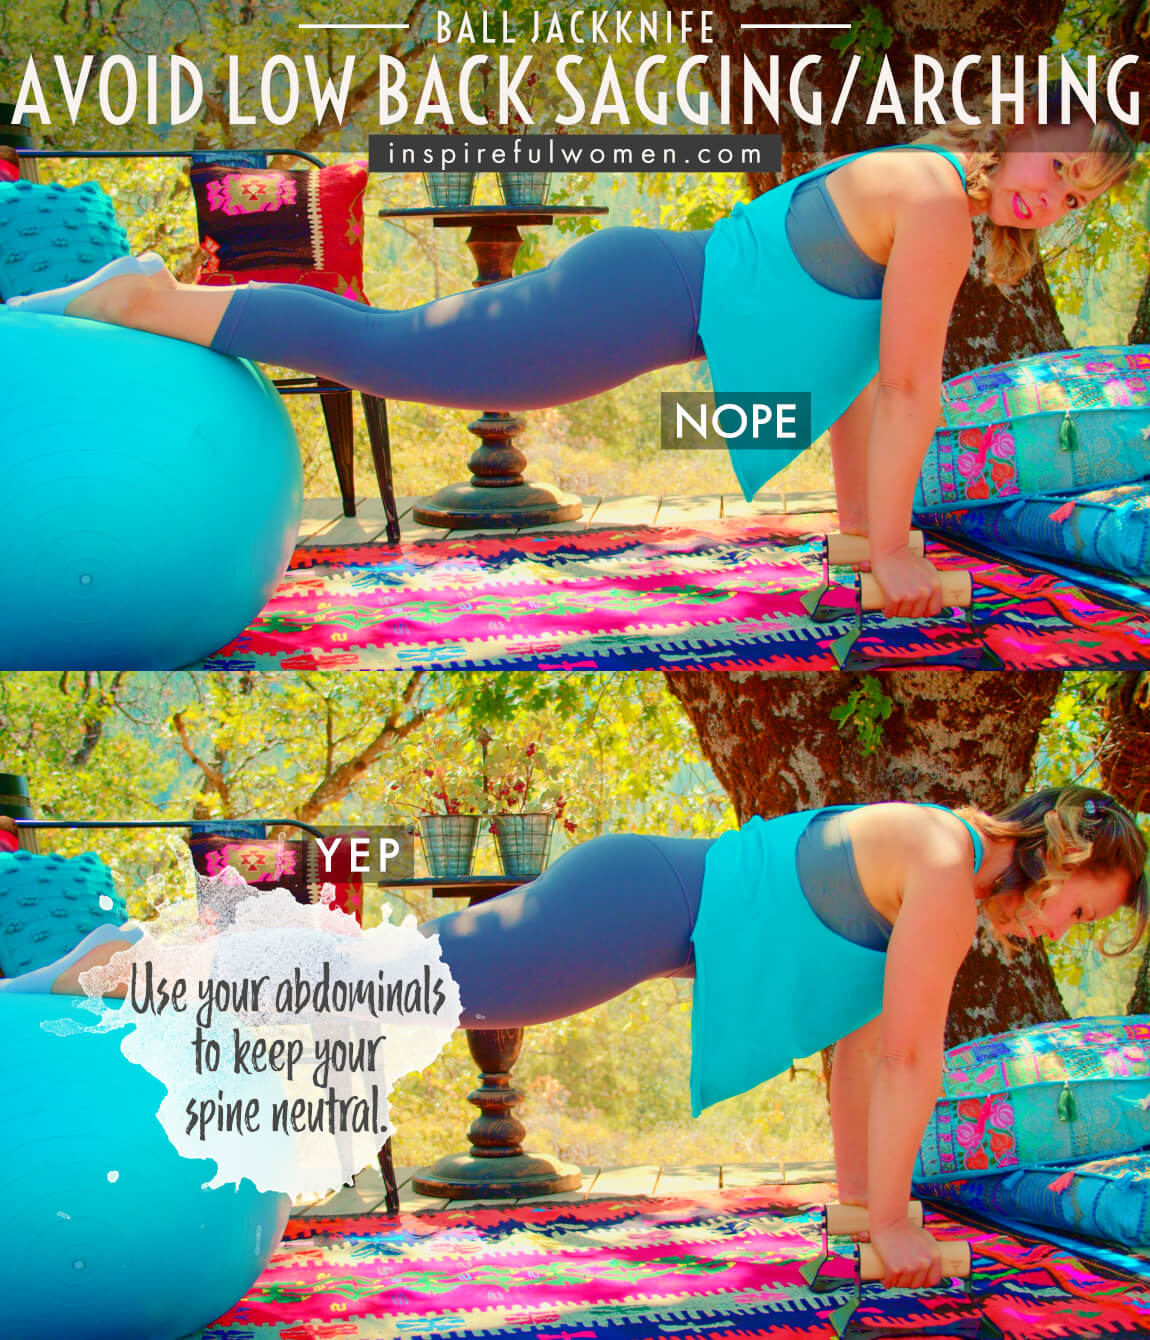 avoid-low-back-sagging-arching-stability-ball-jackknife-neutral-spine-core-exercise-proper-form